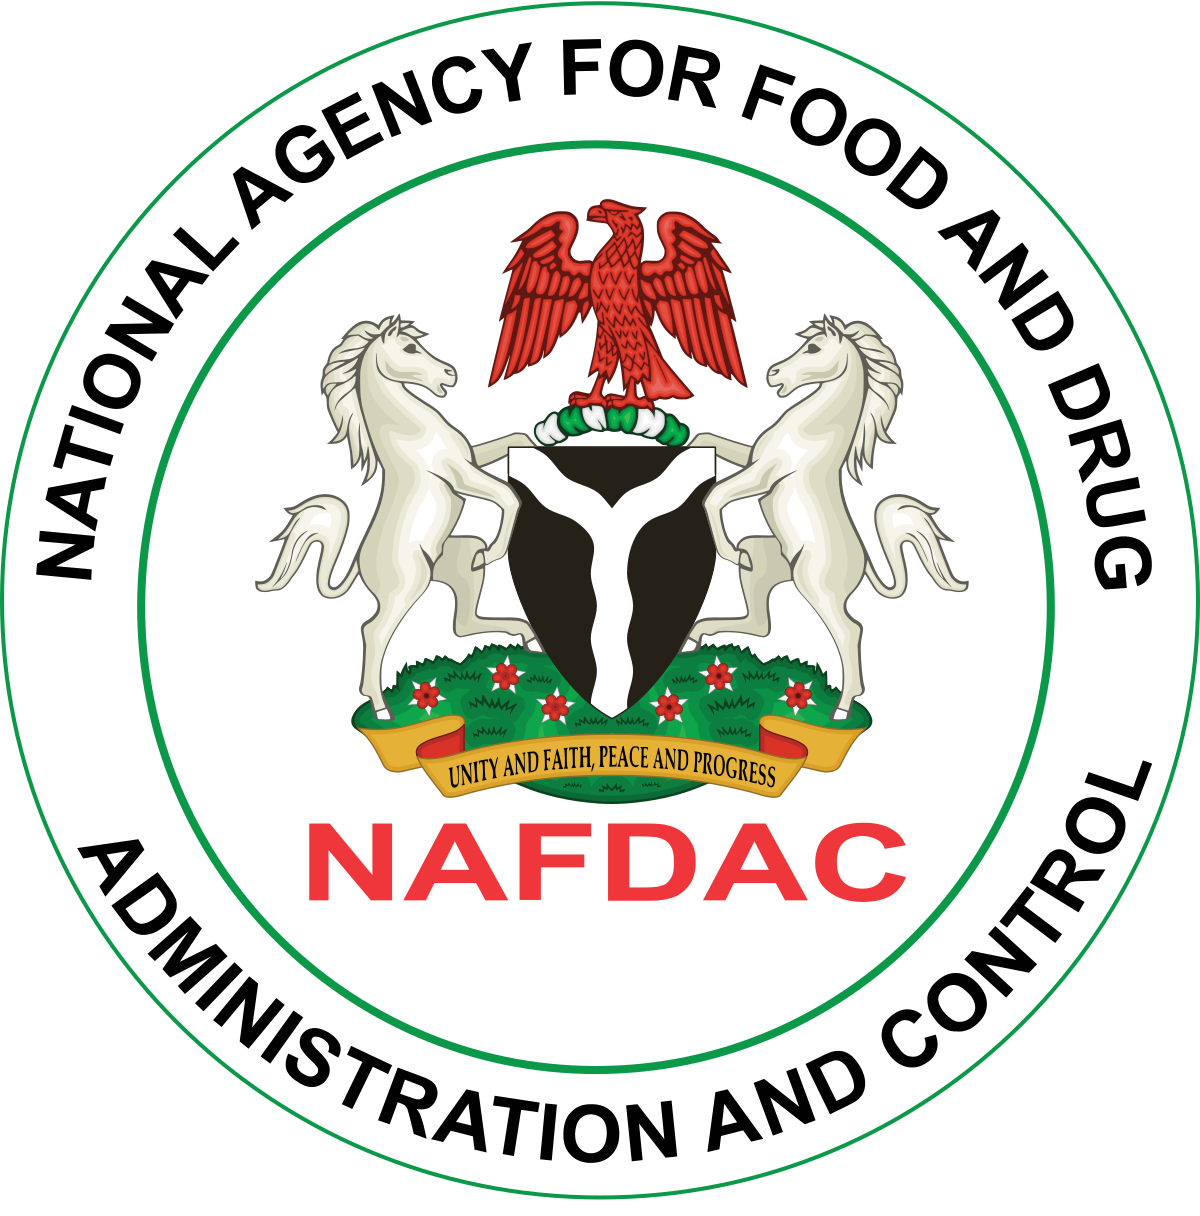 NAFDAC warns against use of carbide, others to ripen fruits